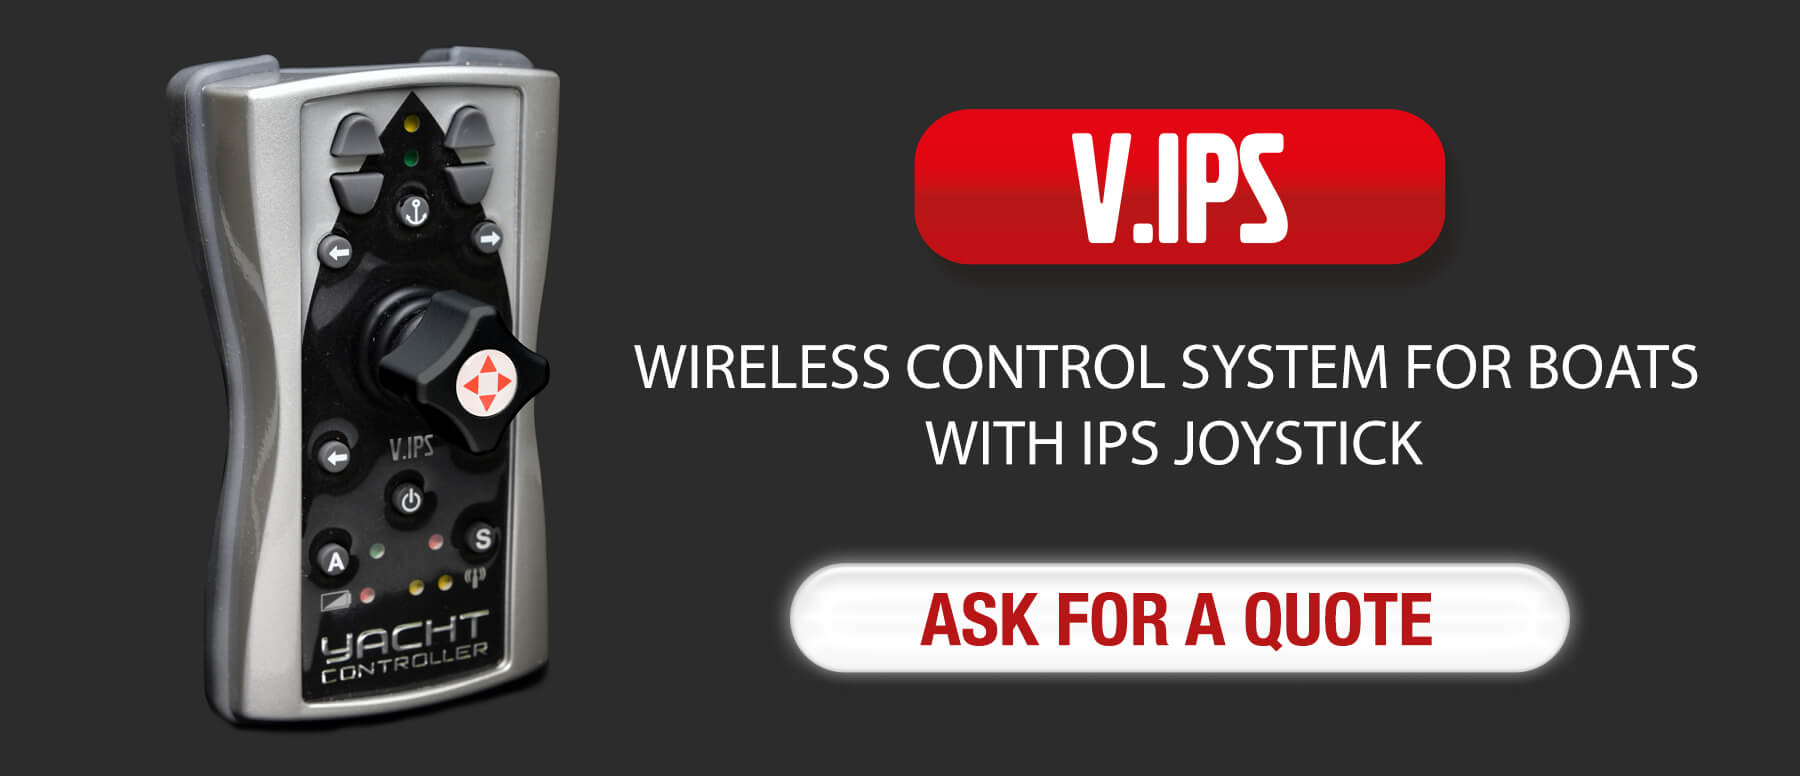 V.IPS Wireless Control System for Boats